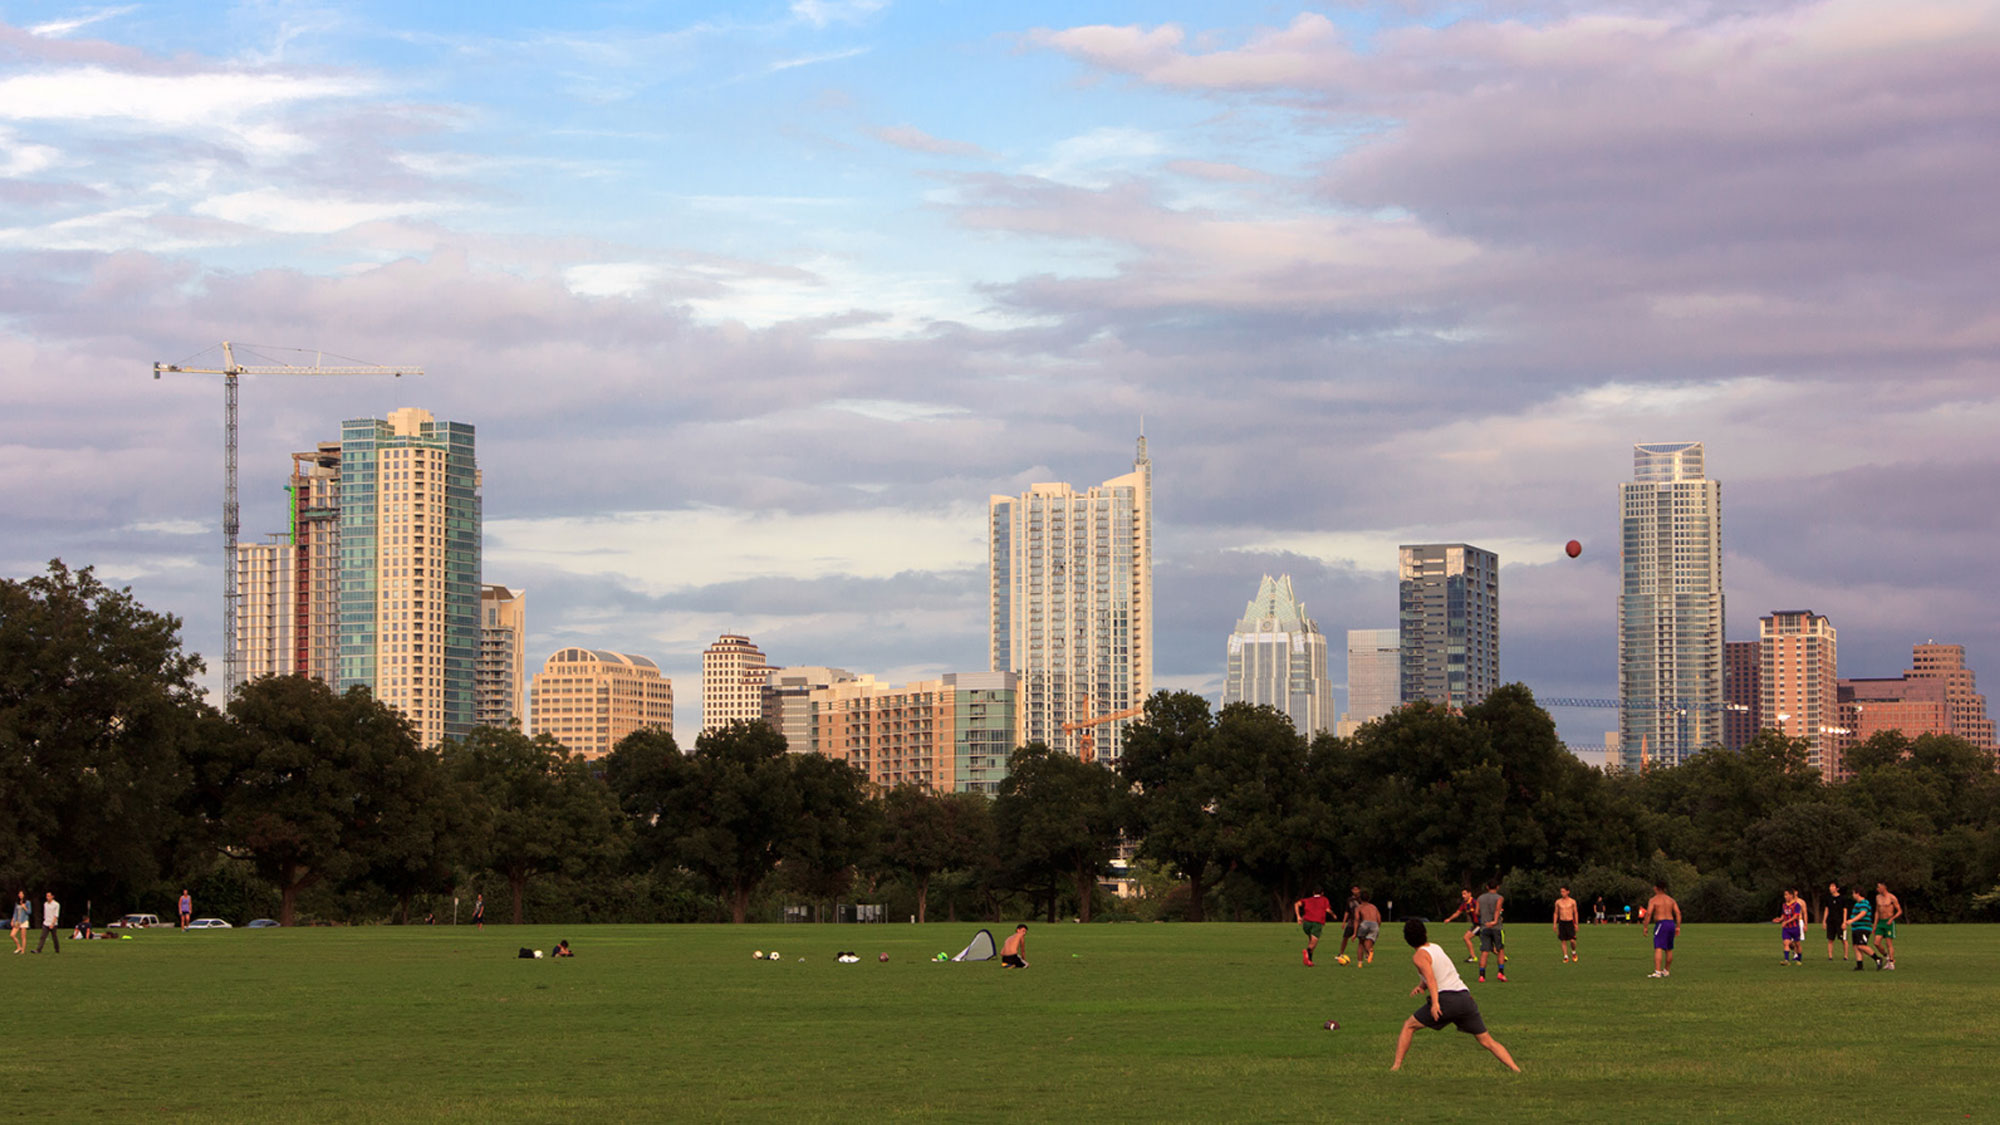 People playing in a green outdoor city park at dusk